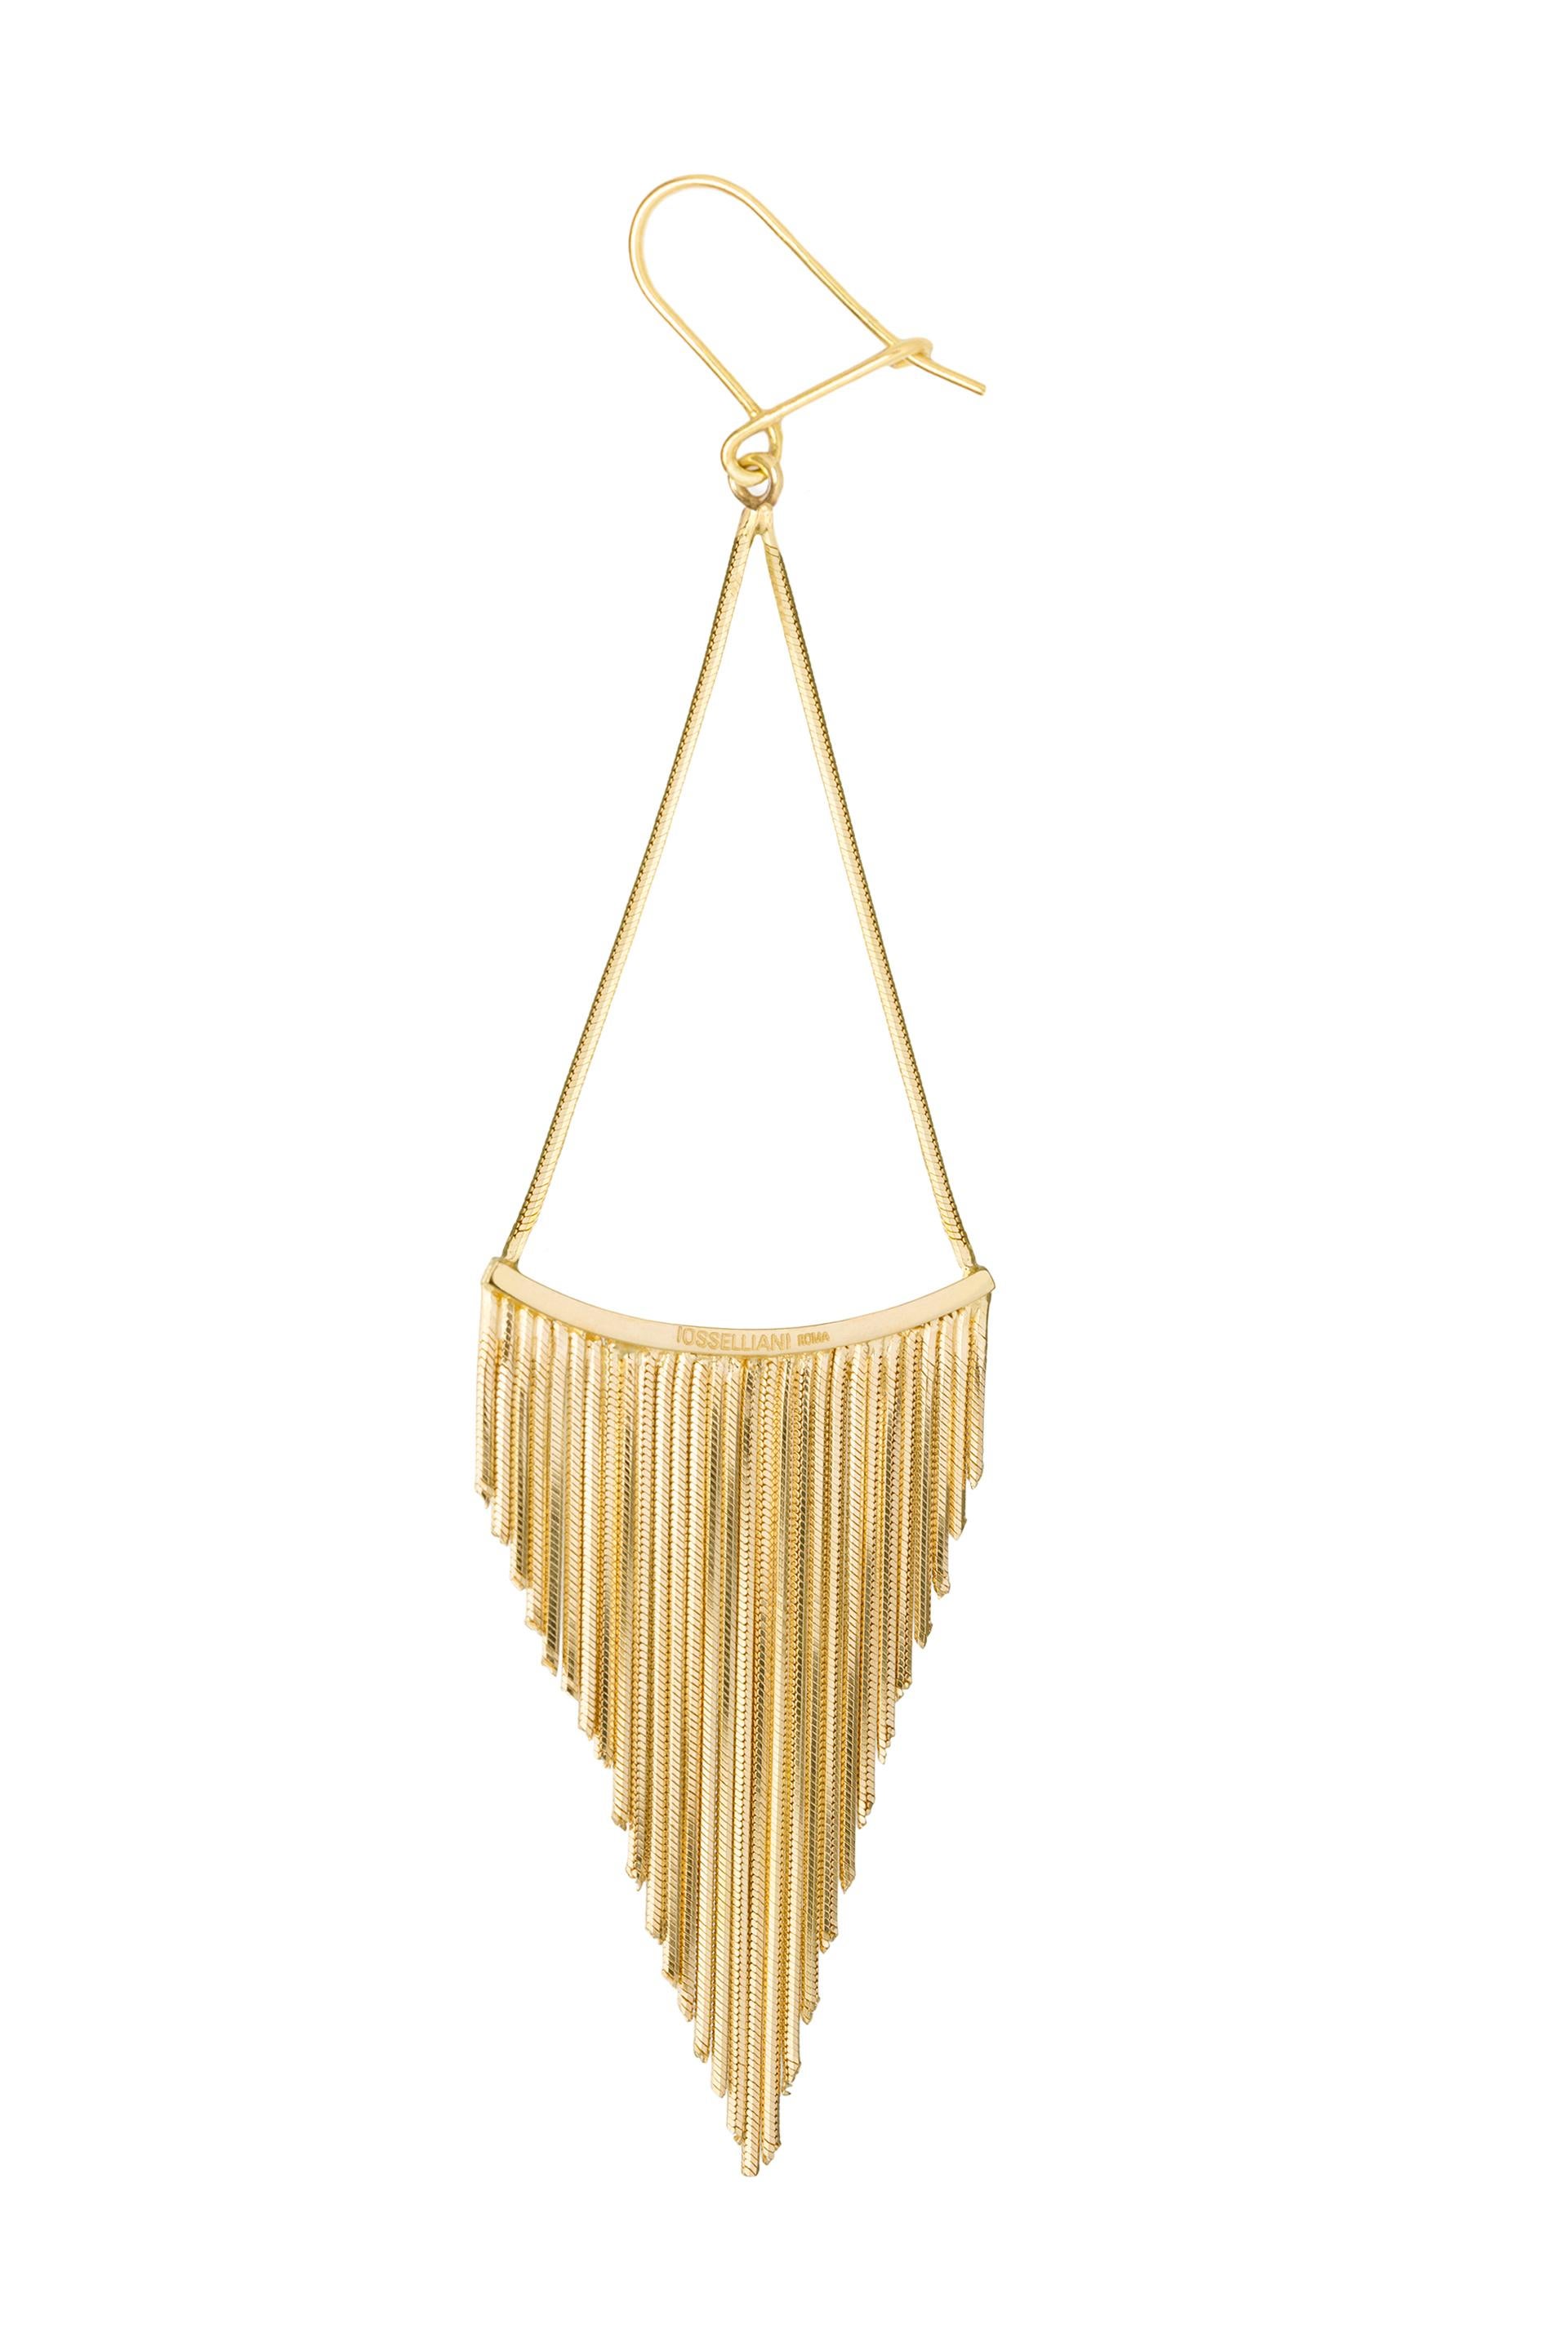 Contemporary Swinging Fringe Earring in 18 Carat Yellow Gold from Iosselliani For Sale